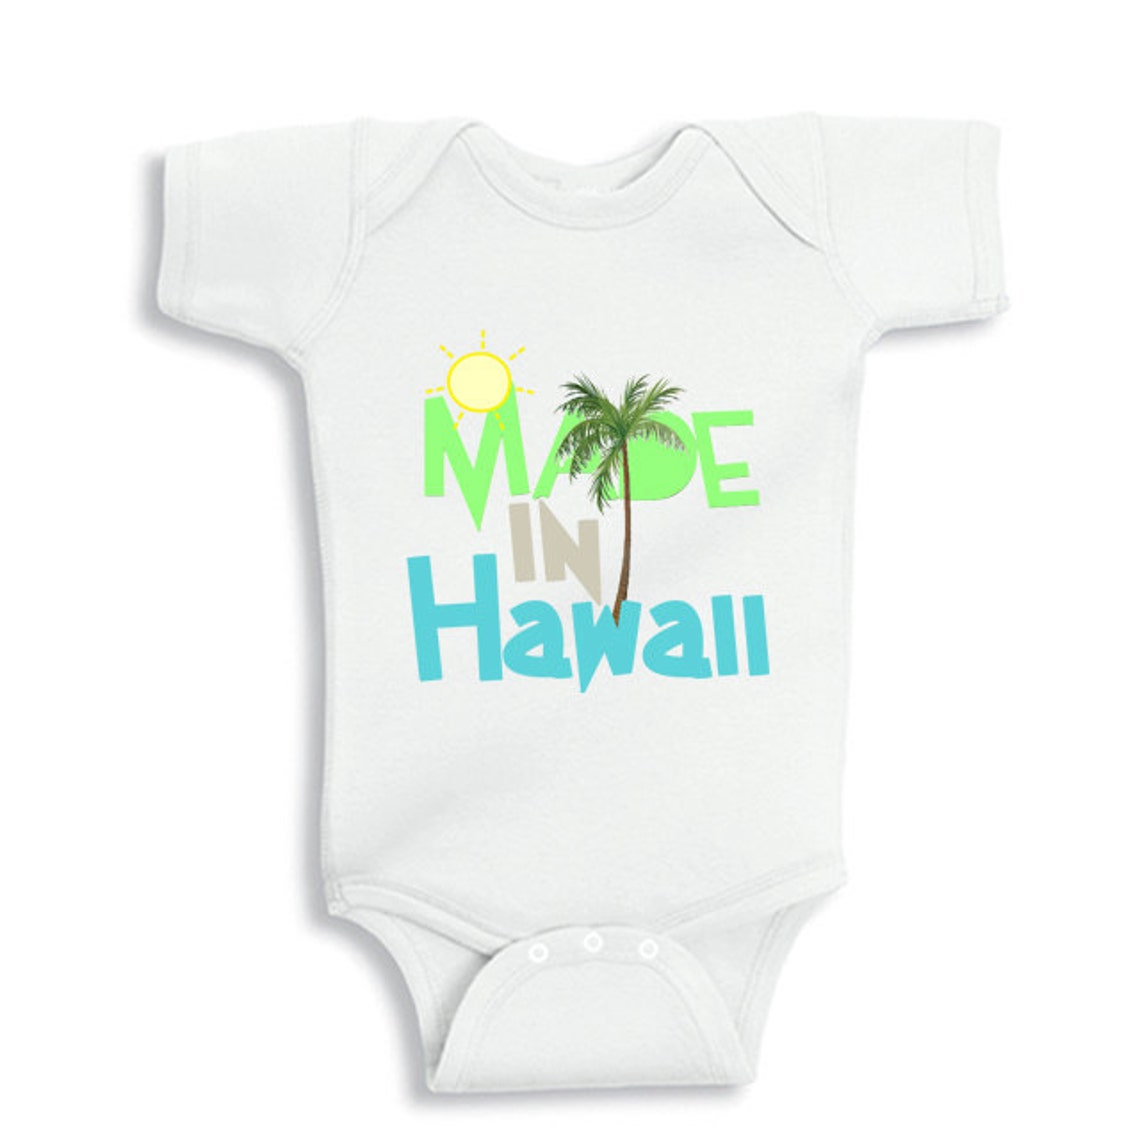 Made in Hawaii funny baby bodysuit or Baby Shirt | Etsy